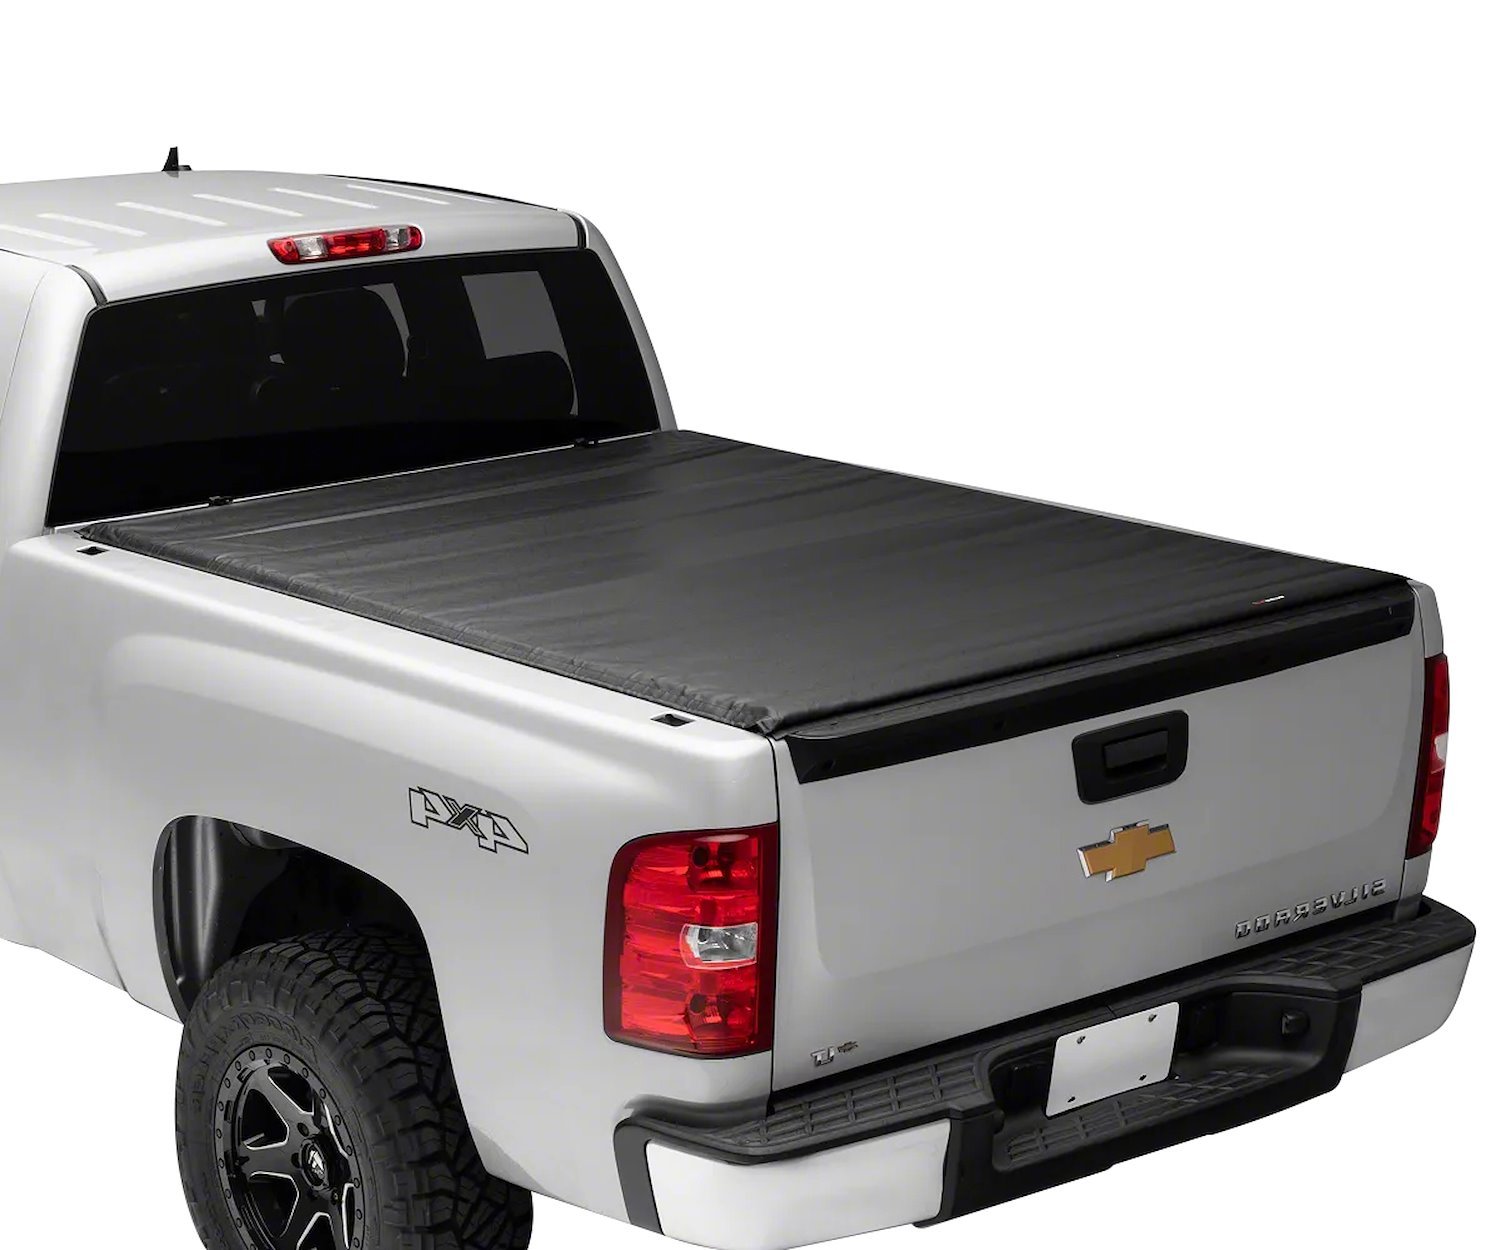 ROLL UP TRUCK BED COVER B CHEVROLET SILVERADO 2007-2014 07-13 FULL SIZE / 2014 FULL SIZE 2500 3500 -